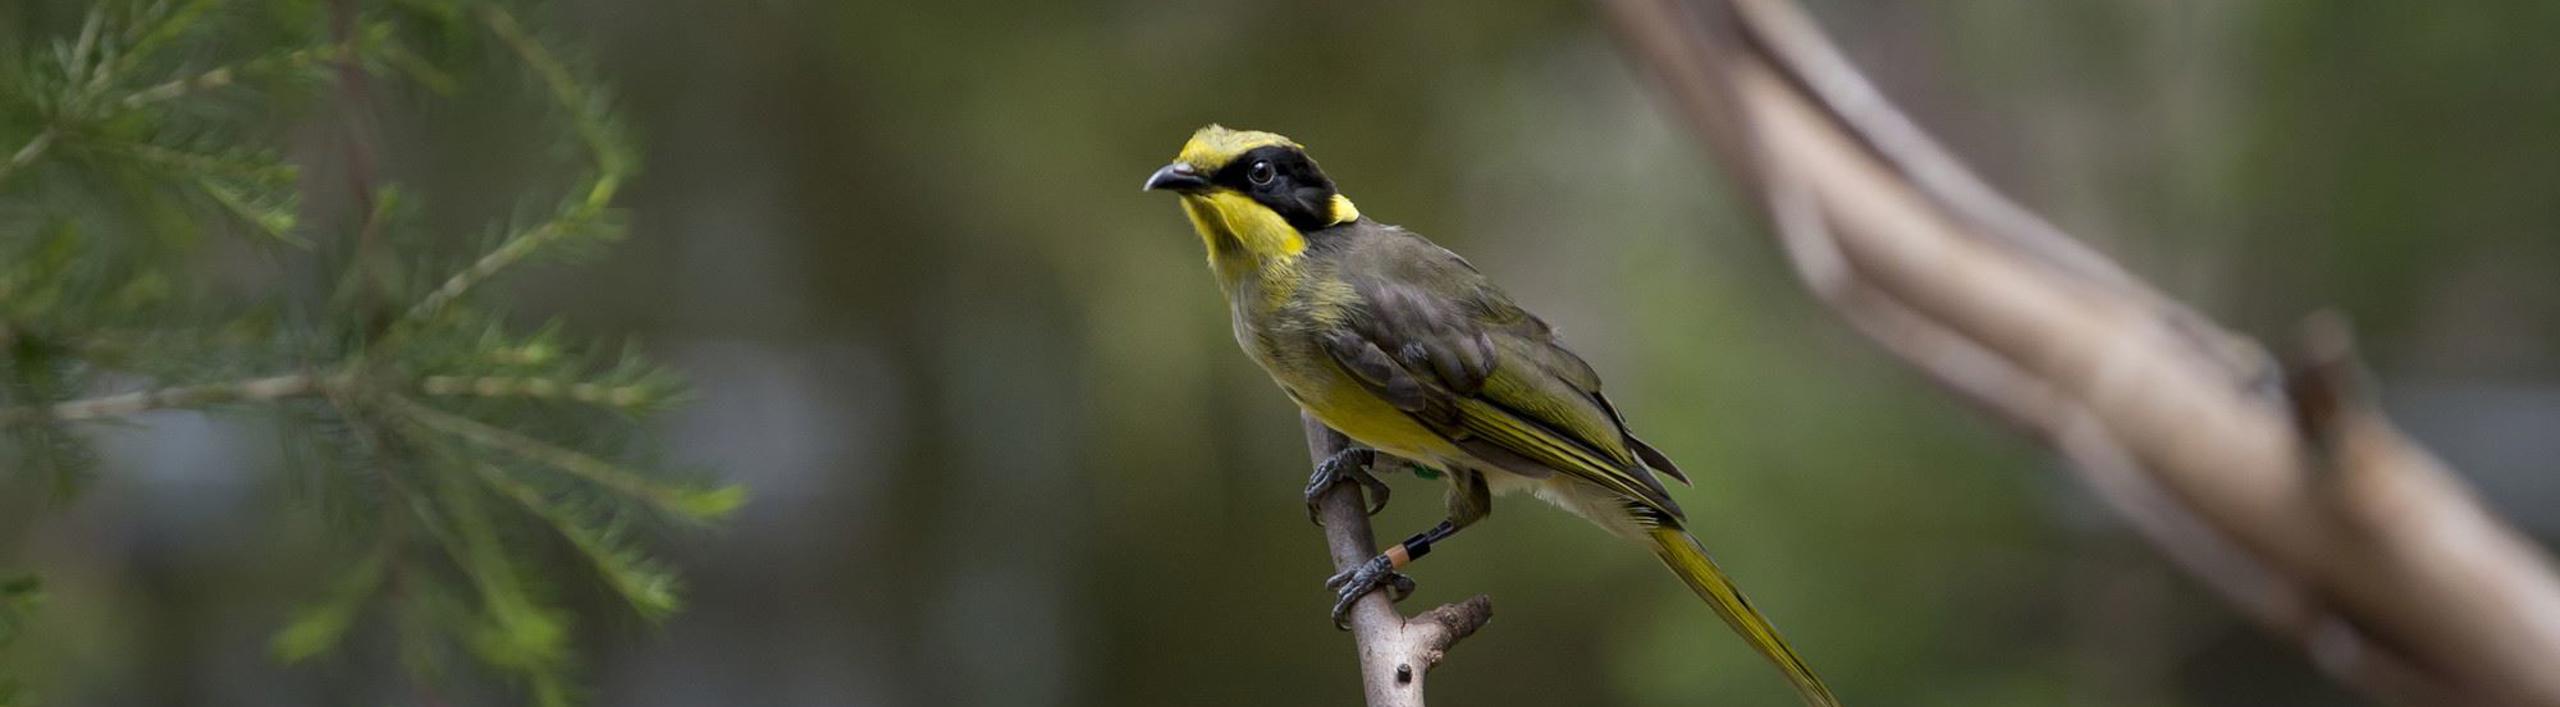 Young Helmeted Honeyeater sitting in a tree.